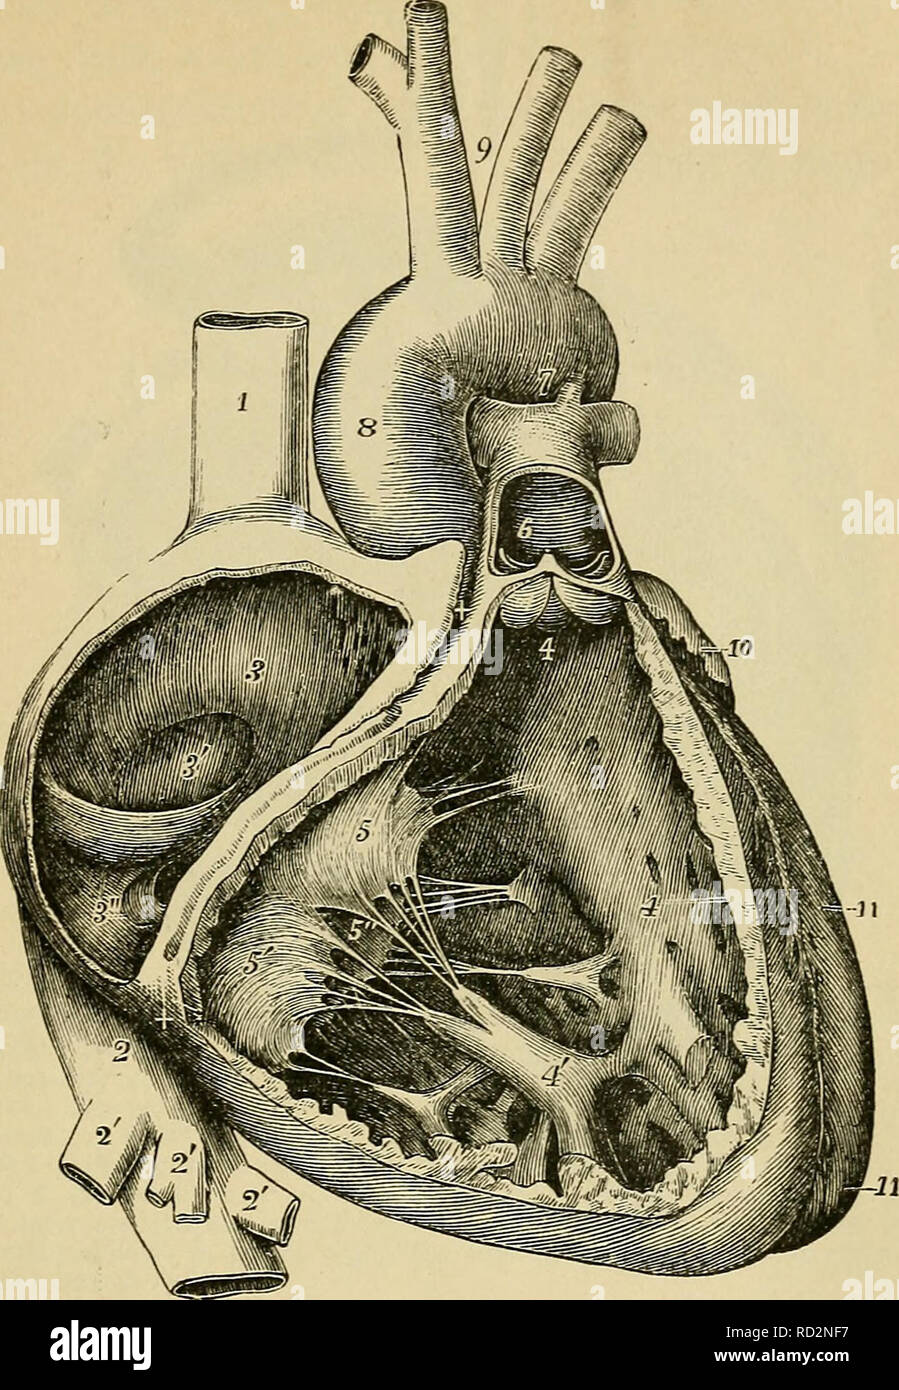 . Elementary physiology. Physiology; Physiology. TJie Circidatory System. 117 The wall of the ventricle near the mouth of the pulmonary artery is smooth, and conical in shape {conns arteriosus)^ narrow-. FiG. 64.—Interior of the right auricle and ventricle, exposed by removal of the greater part of their right and anterior walls. (Allen Thomson.)  I, superior vena cava ; 2. inferior vena cava ; 2', hepatic veins ; 3, septum of the auricles; 3', fossa ovalis ; the Eustachian valve is just below ; 3&quot;, aperture of the coronary sinus with its valve; +, +, right auriculo-ventricular groove, a Stock Photo